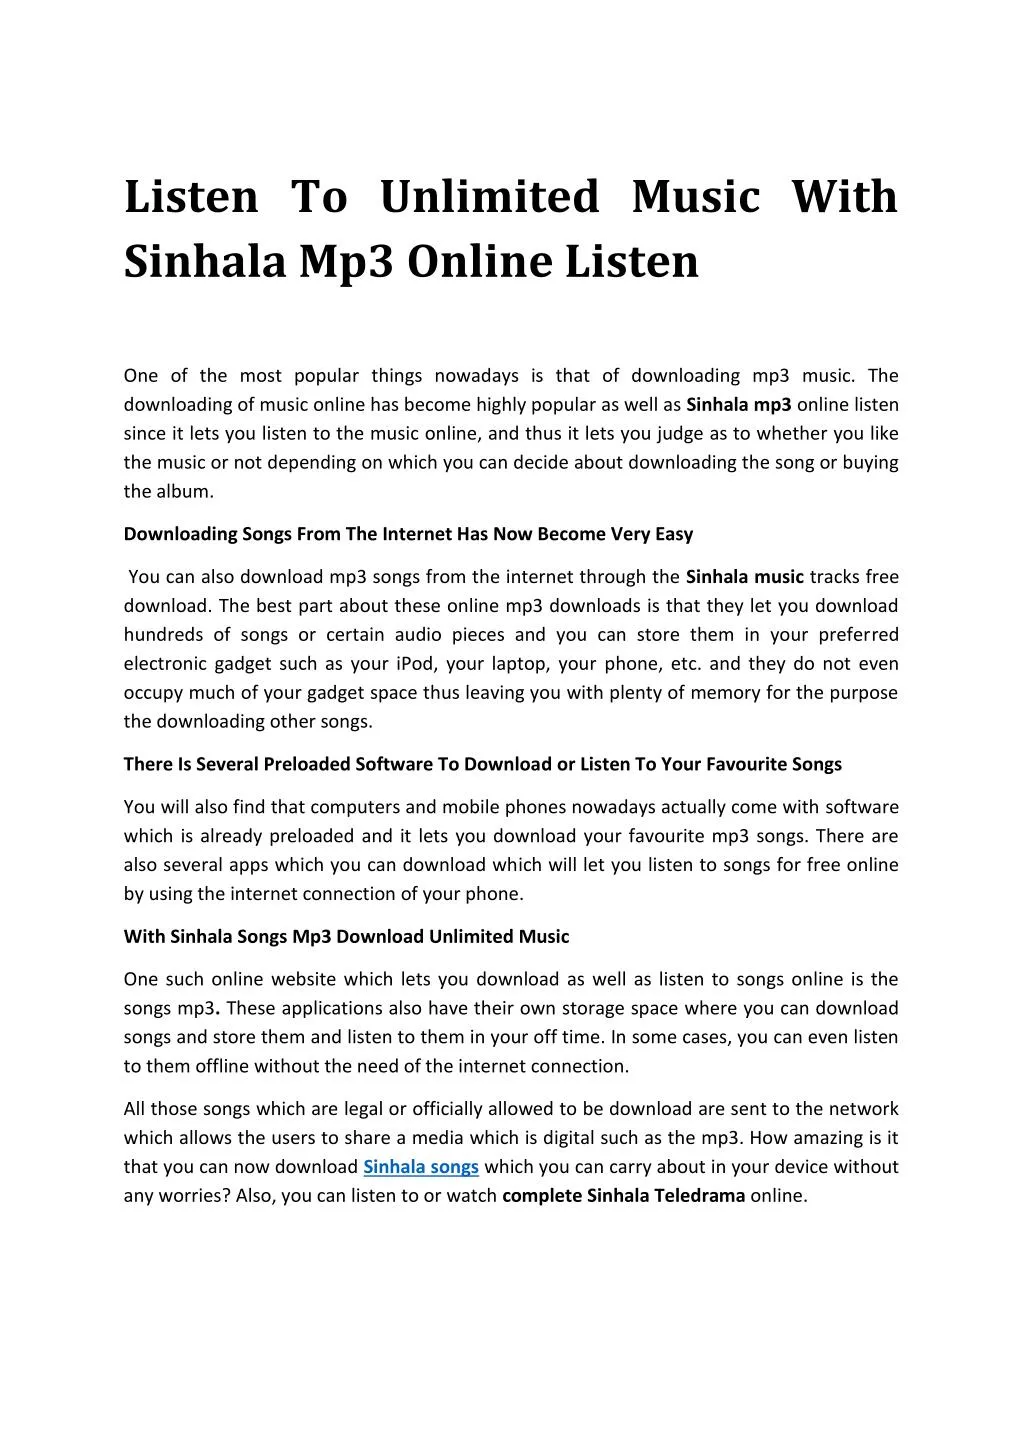 listen to unlimited music with sinhala mp3 online